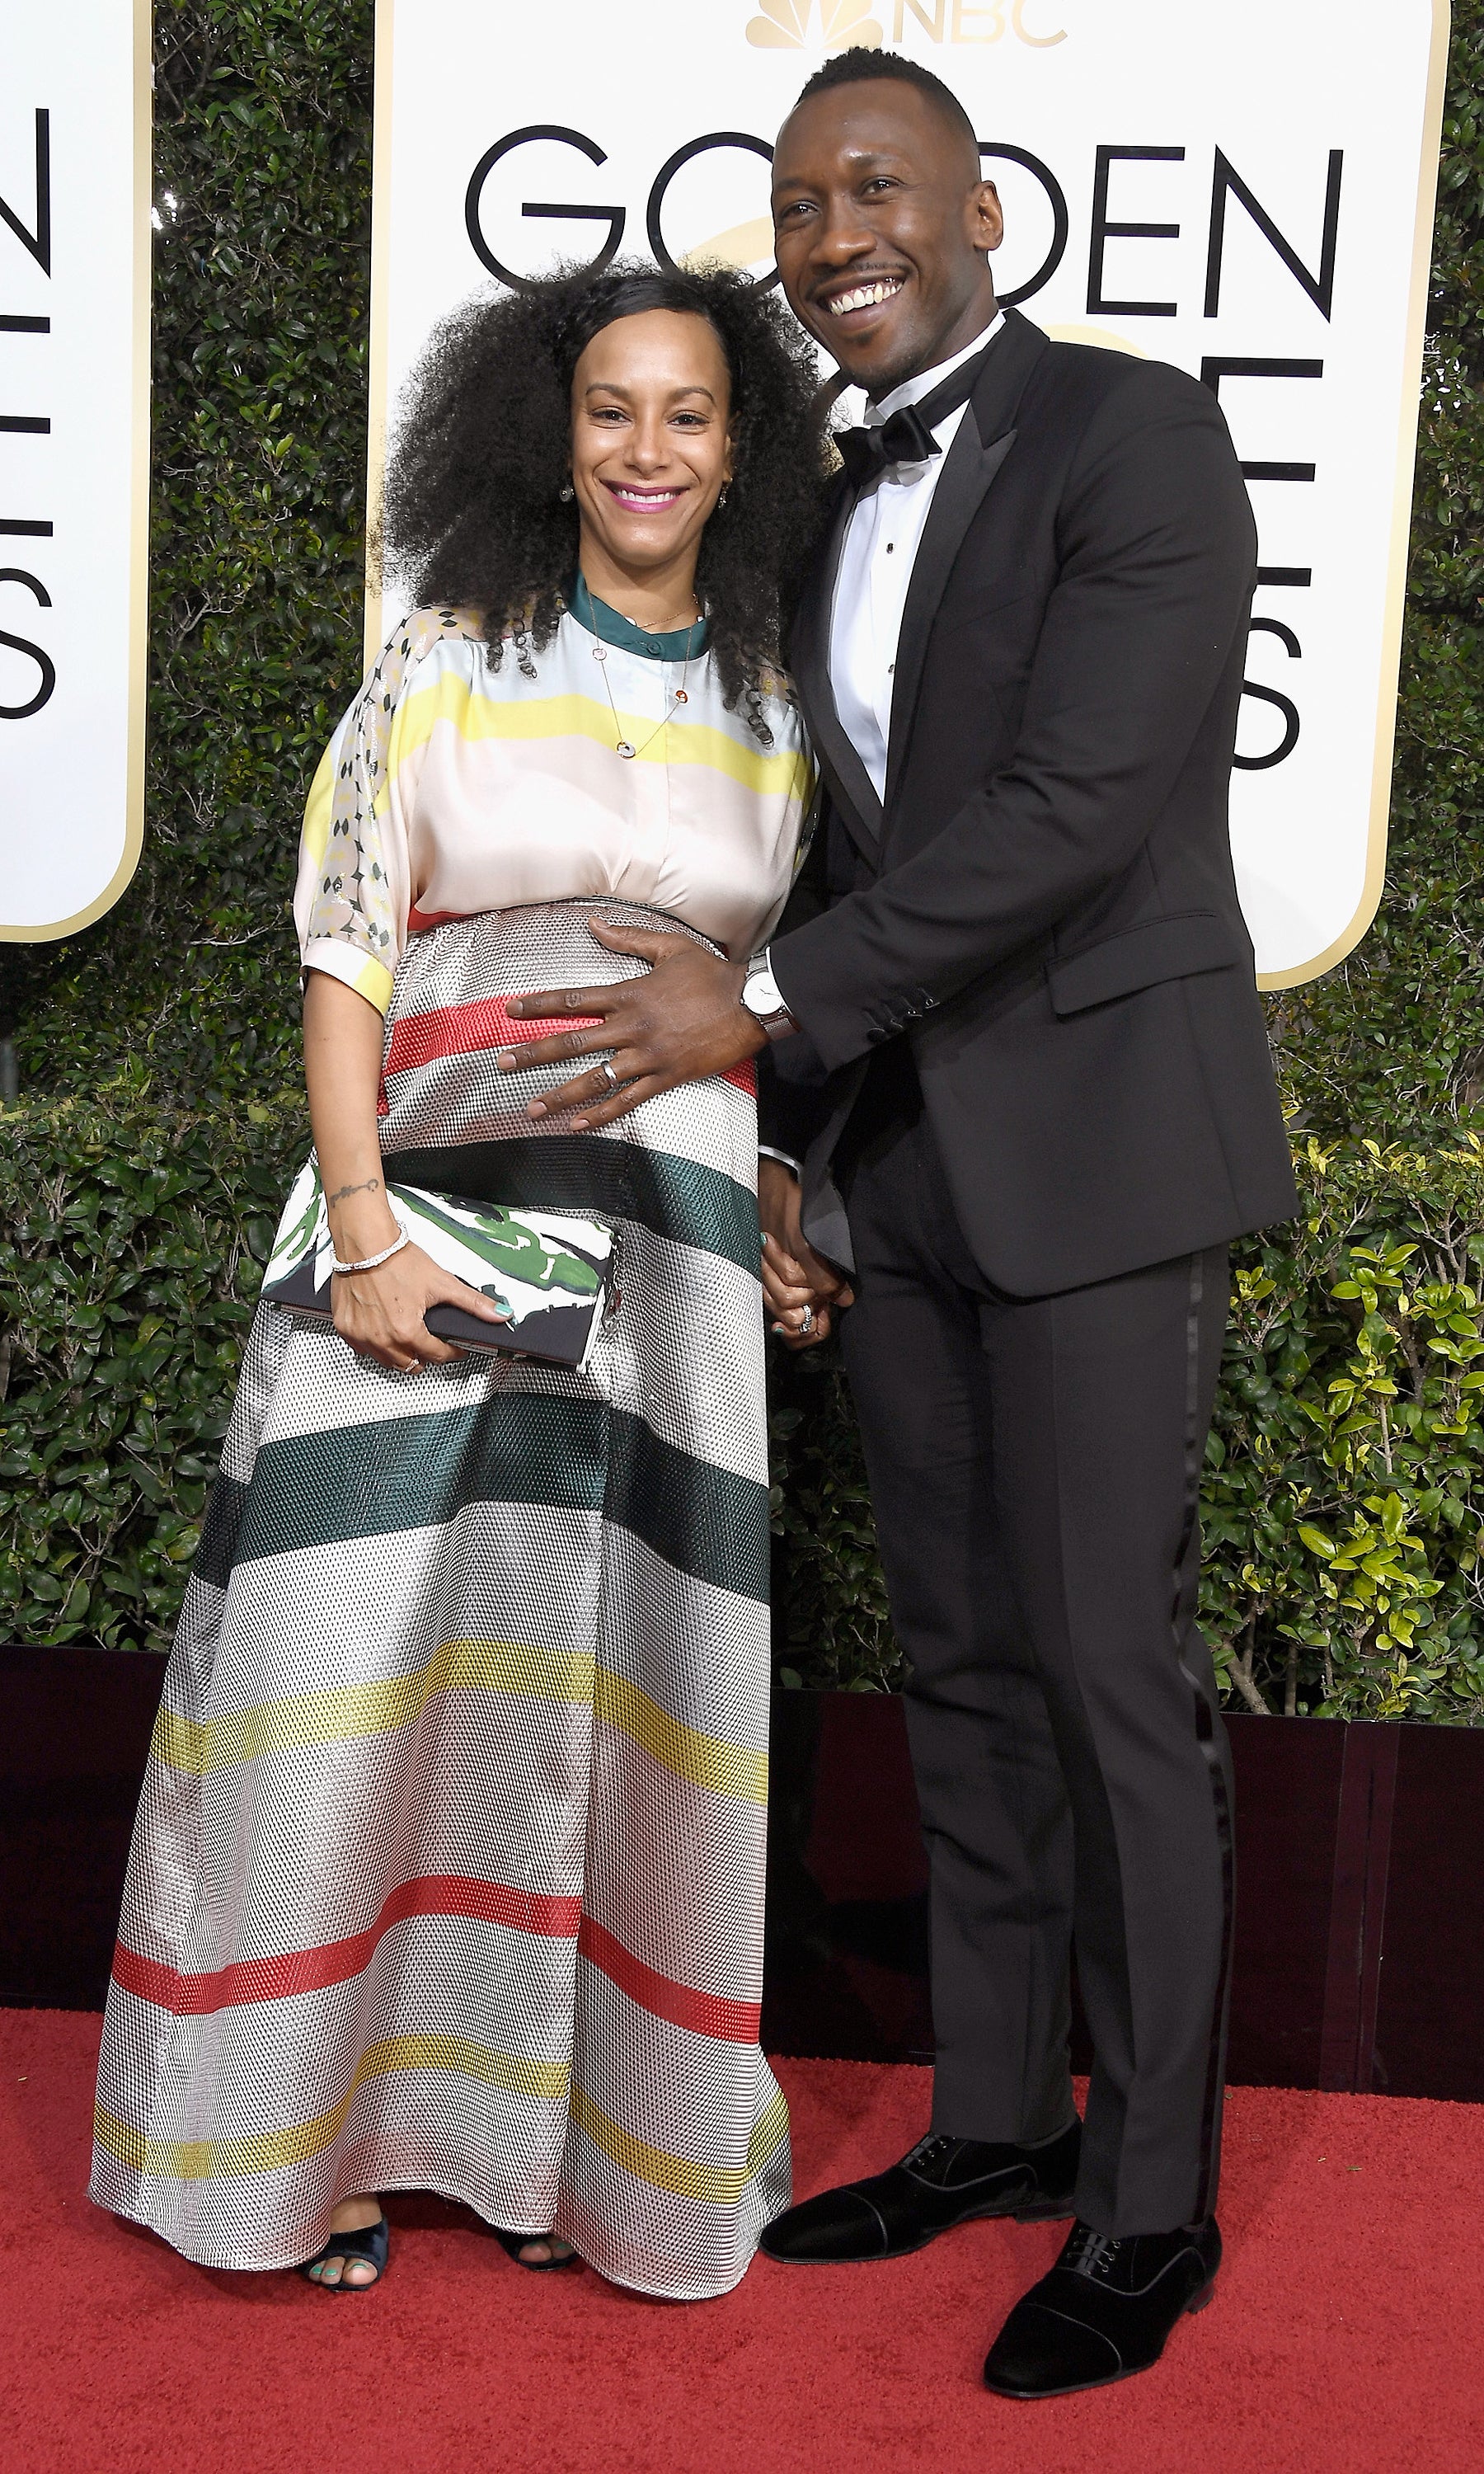 Mahershala Ali Praises Pregnant Wife for Being a ‘Soldier’ During Grueling Awards Season